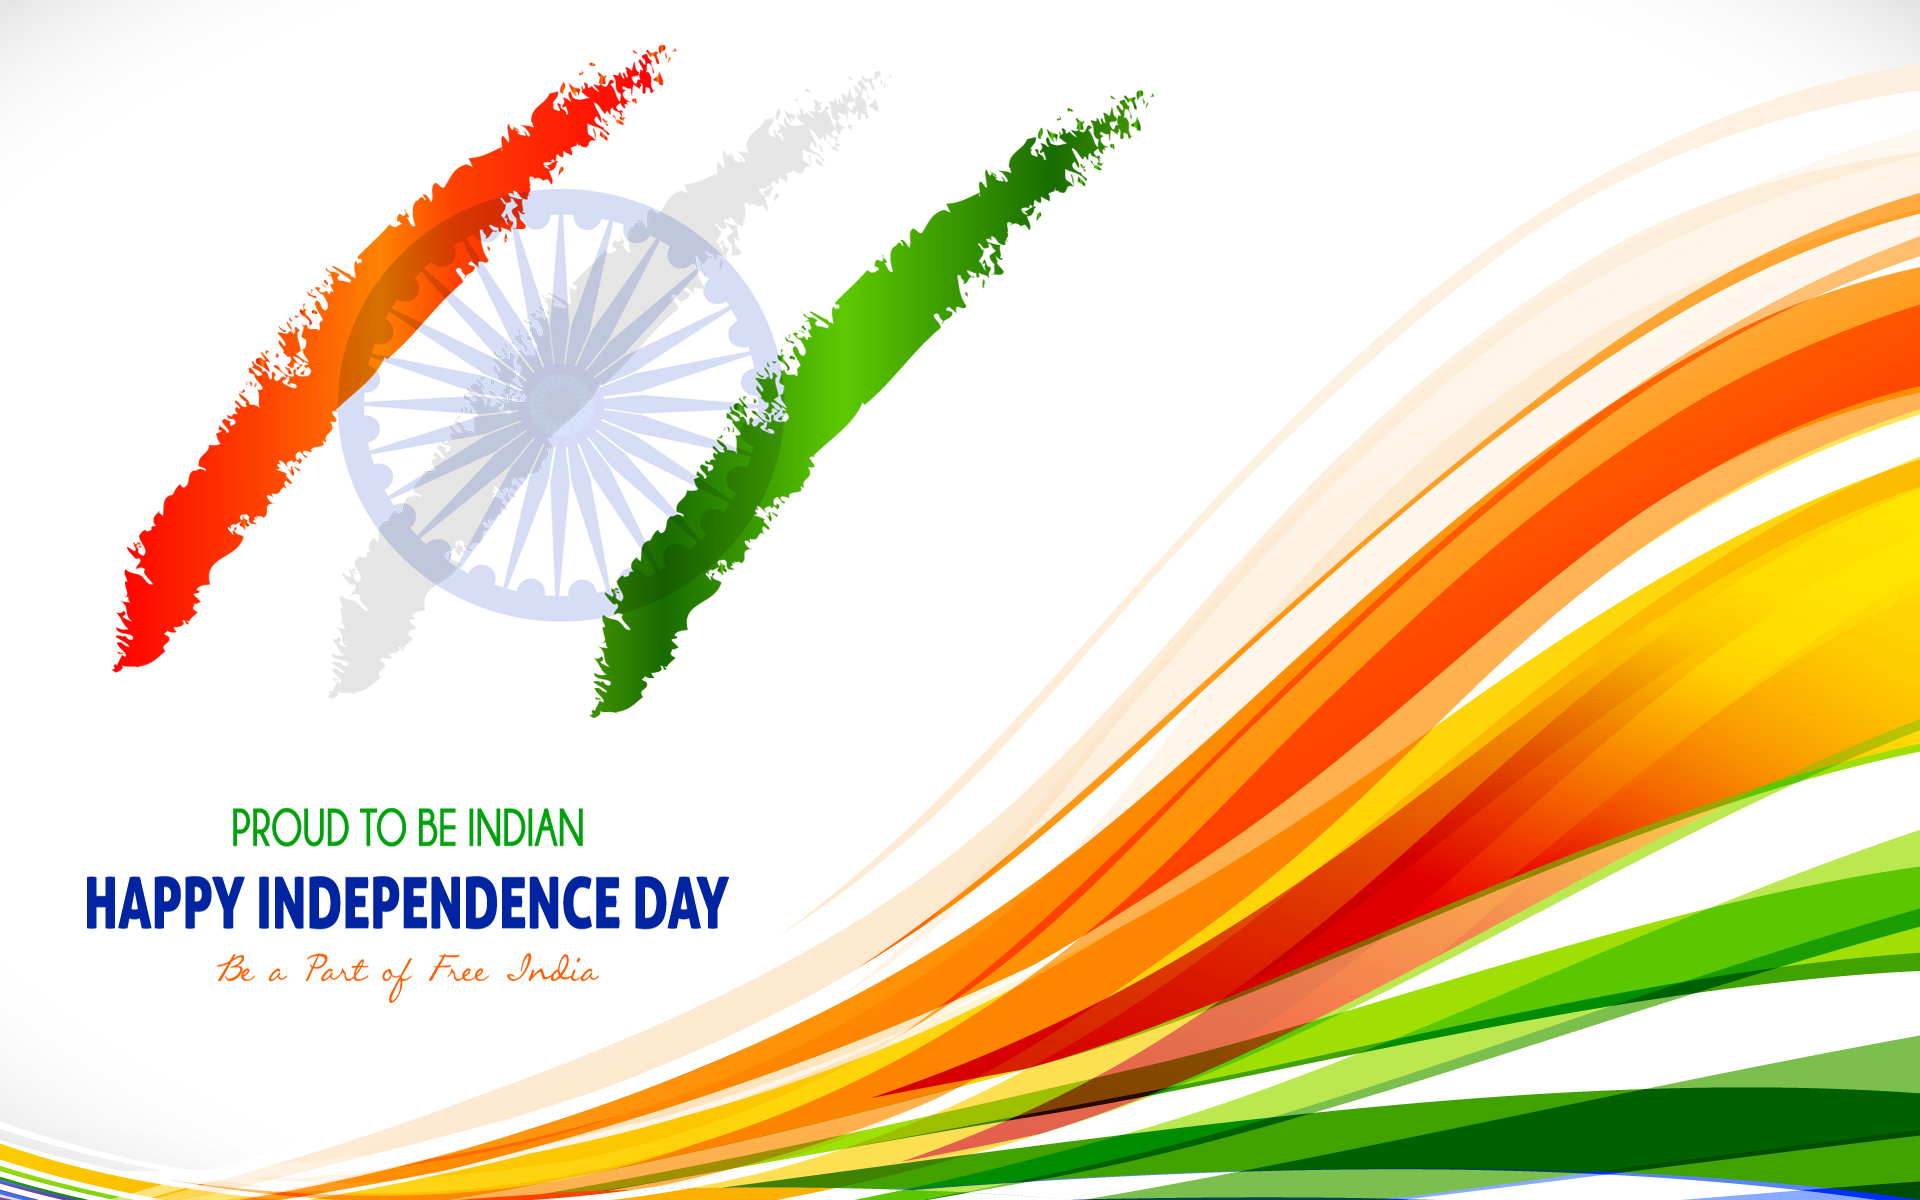 Independence Day Whatsapp Dp